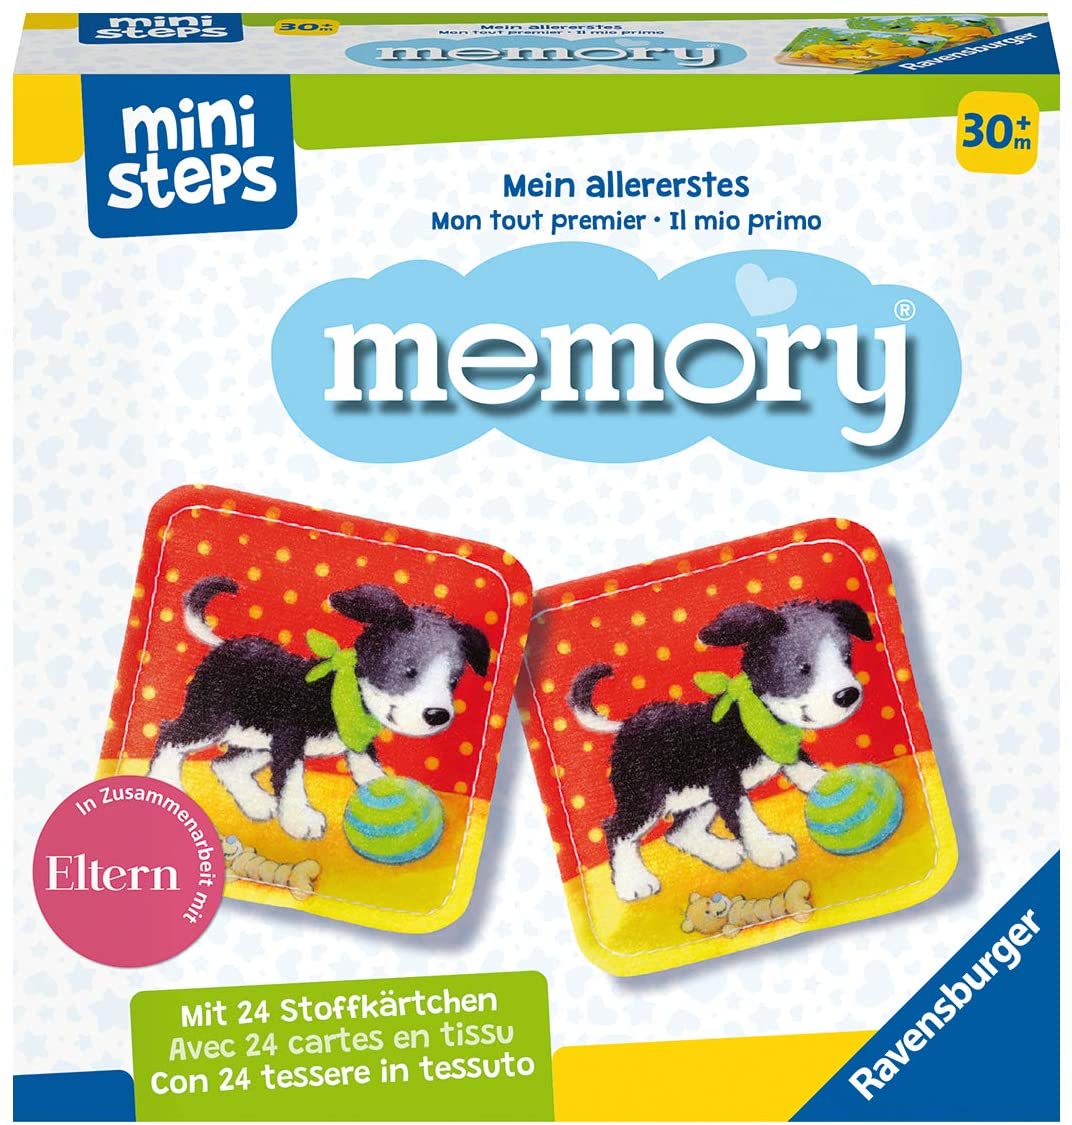 Ravensburger Ministeps 4176 My First Memory, Childrens Game With Fabric Ca